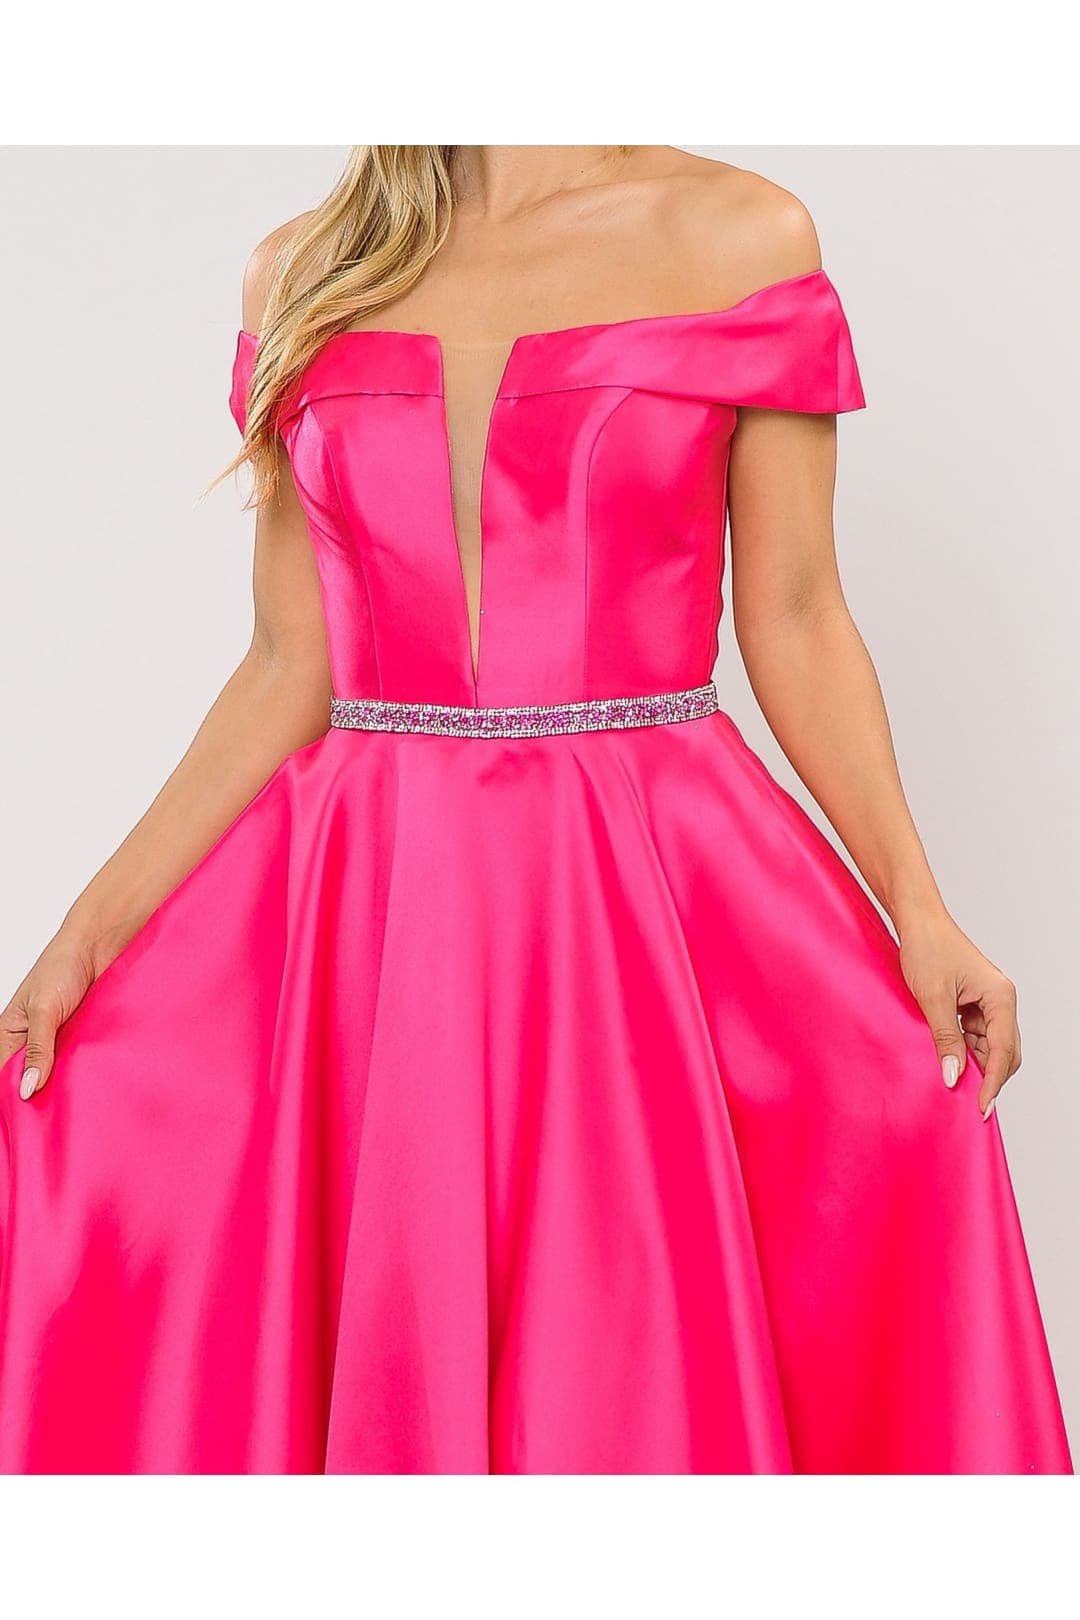 Classy Prom Off The Shoulder Dresses